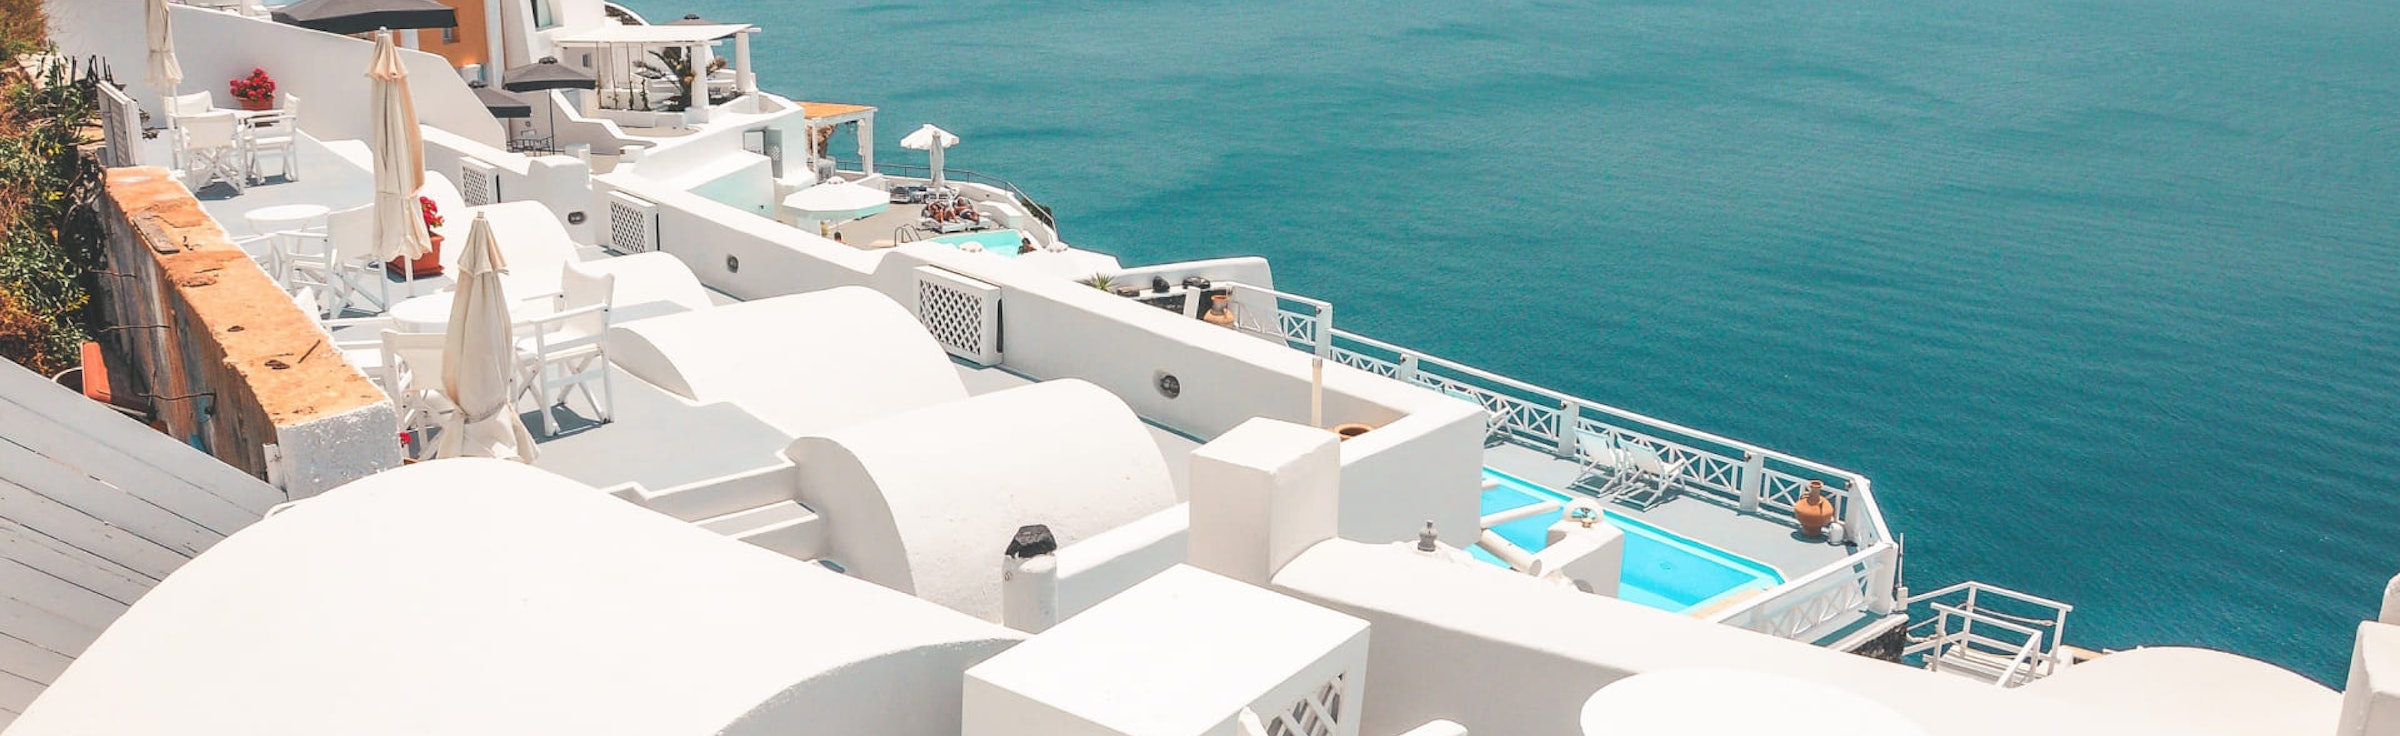 Mykonos Tour Packages from Delhi